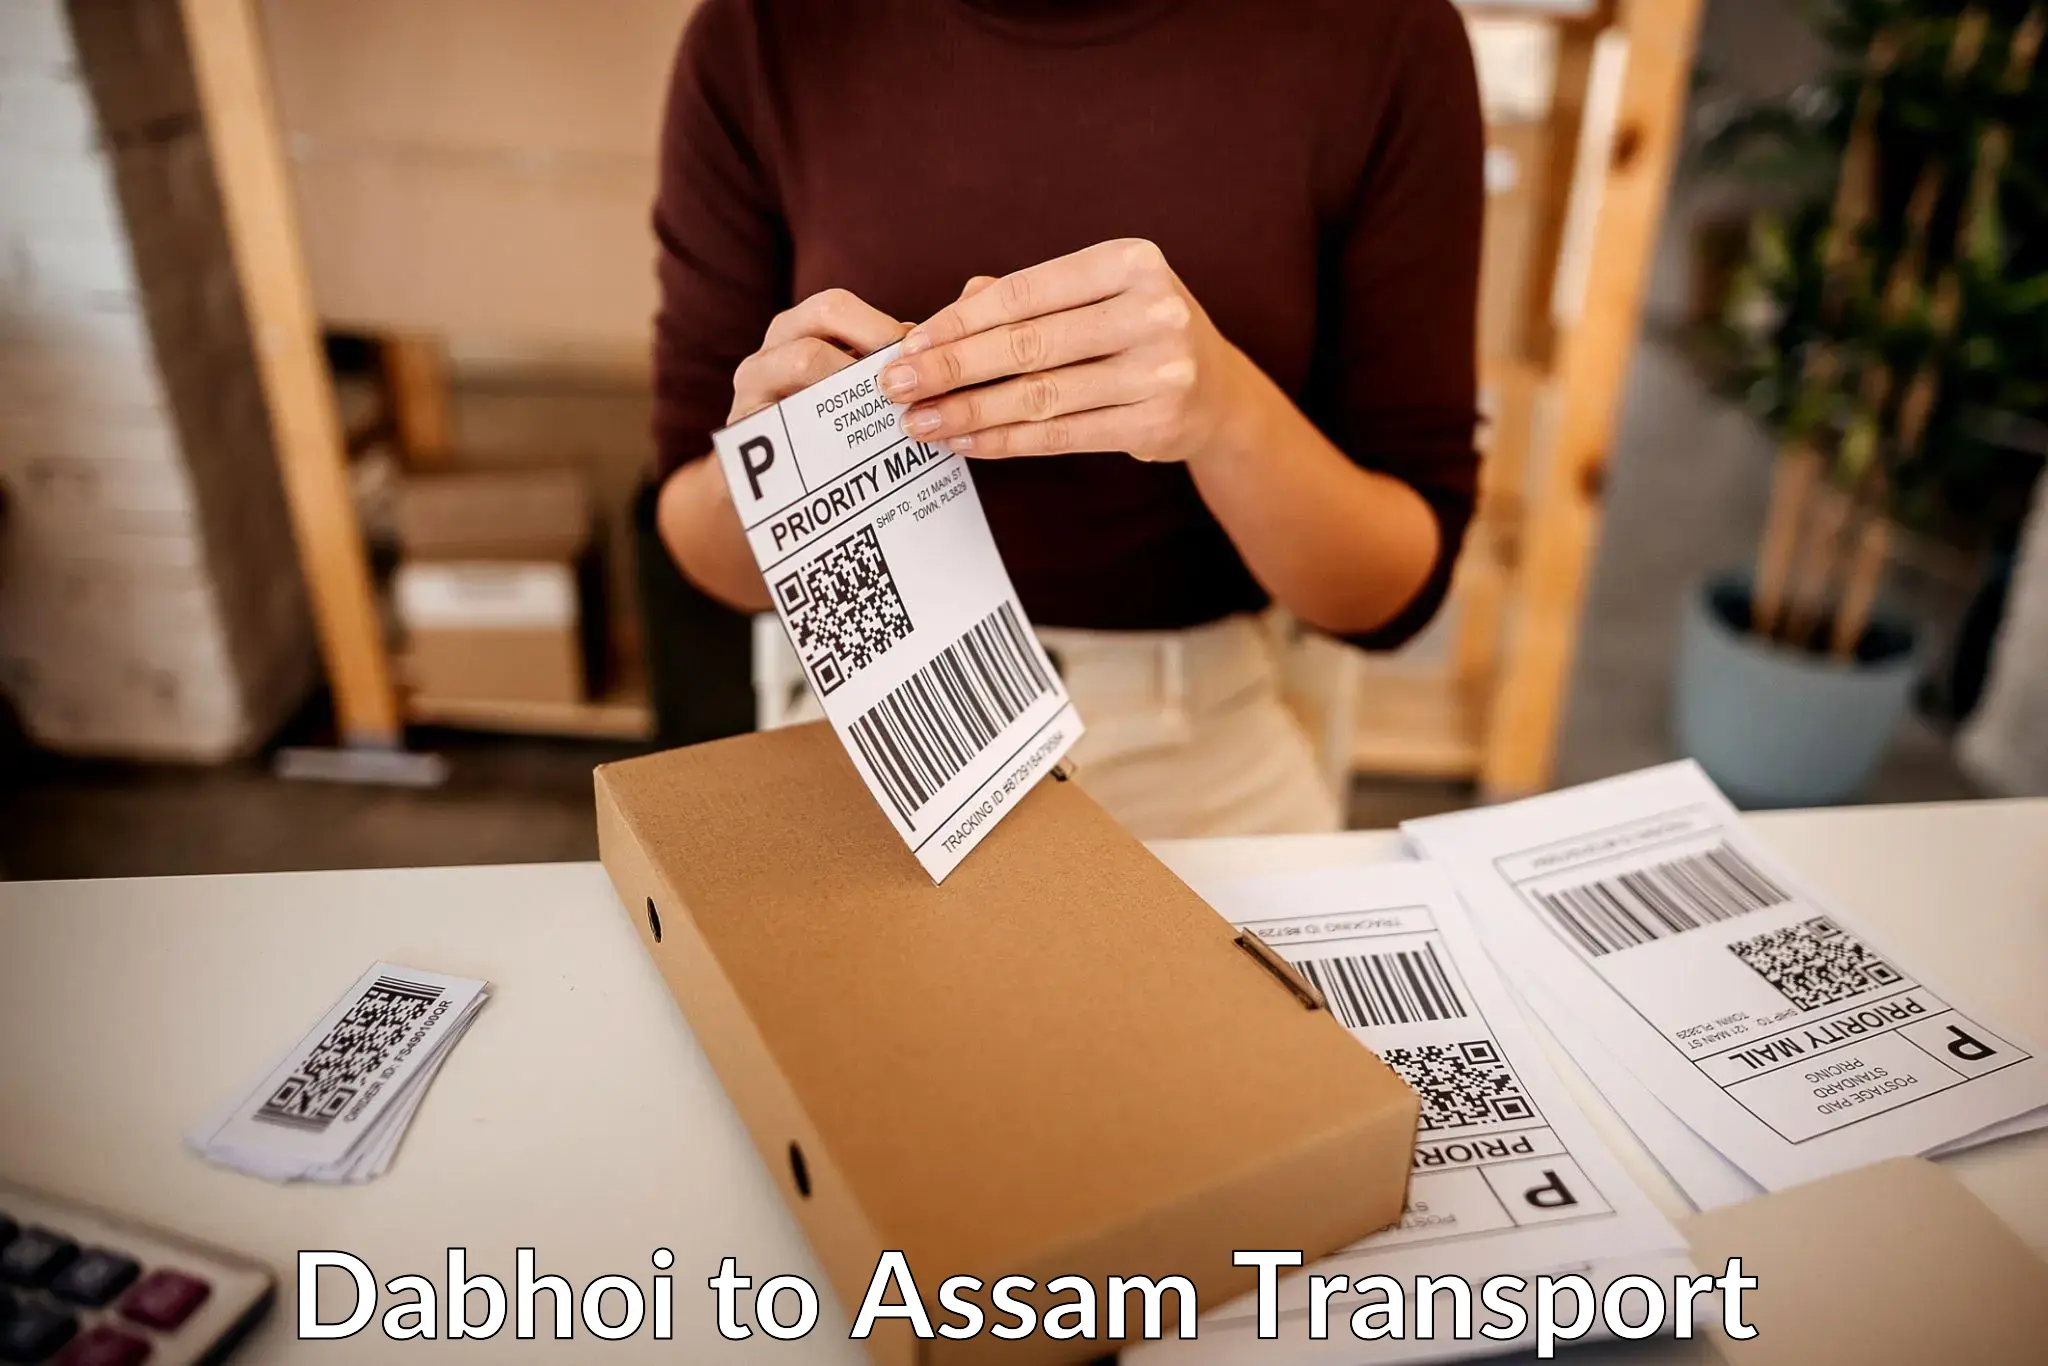 Delivery service Dabhoi to Pailapool